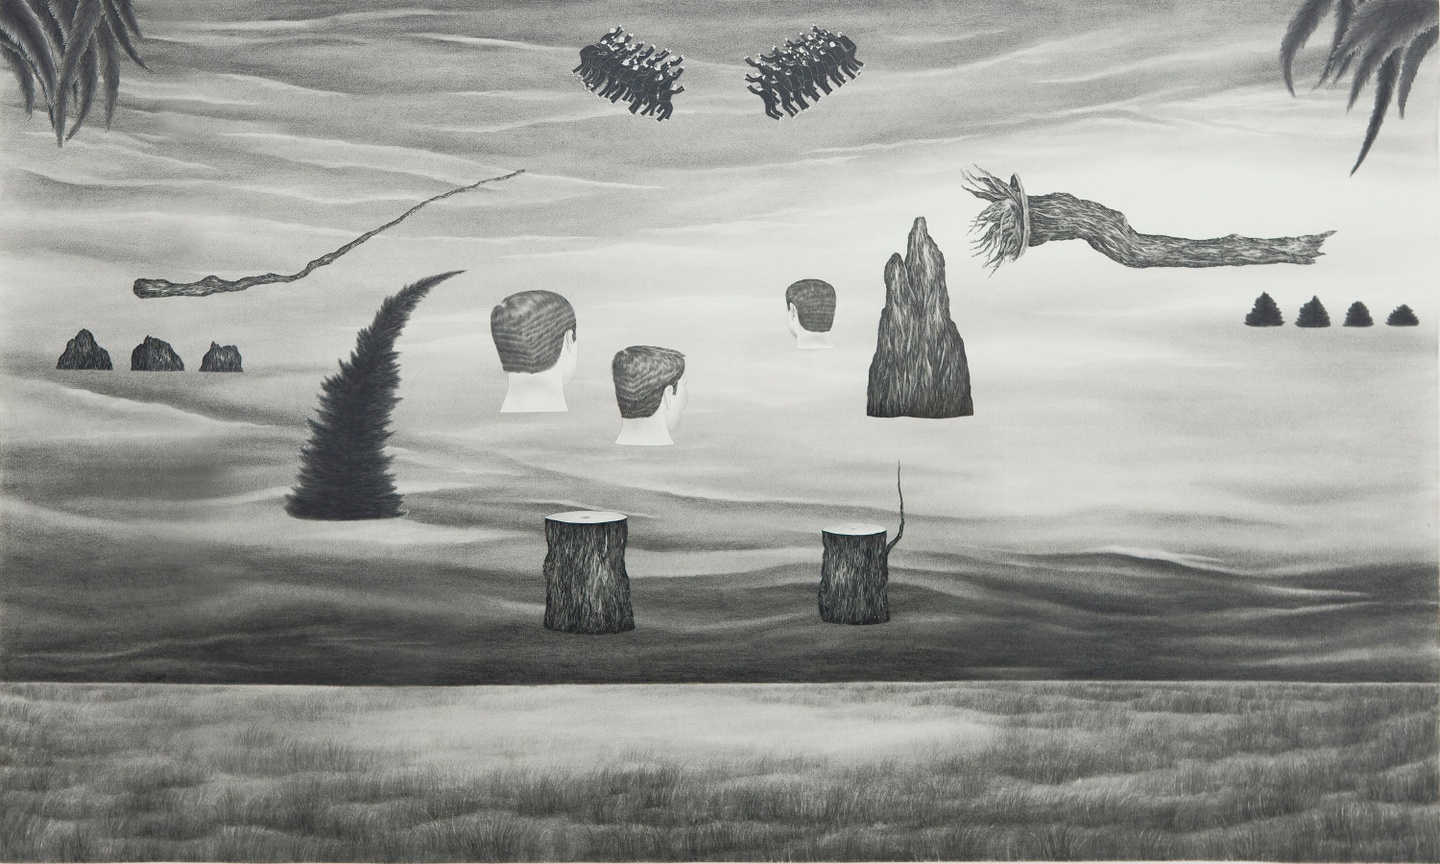 Graphite on paper drawing of three heads poking out of water, with a few trees.